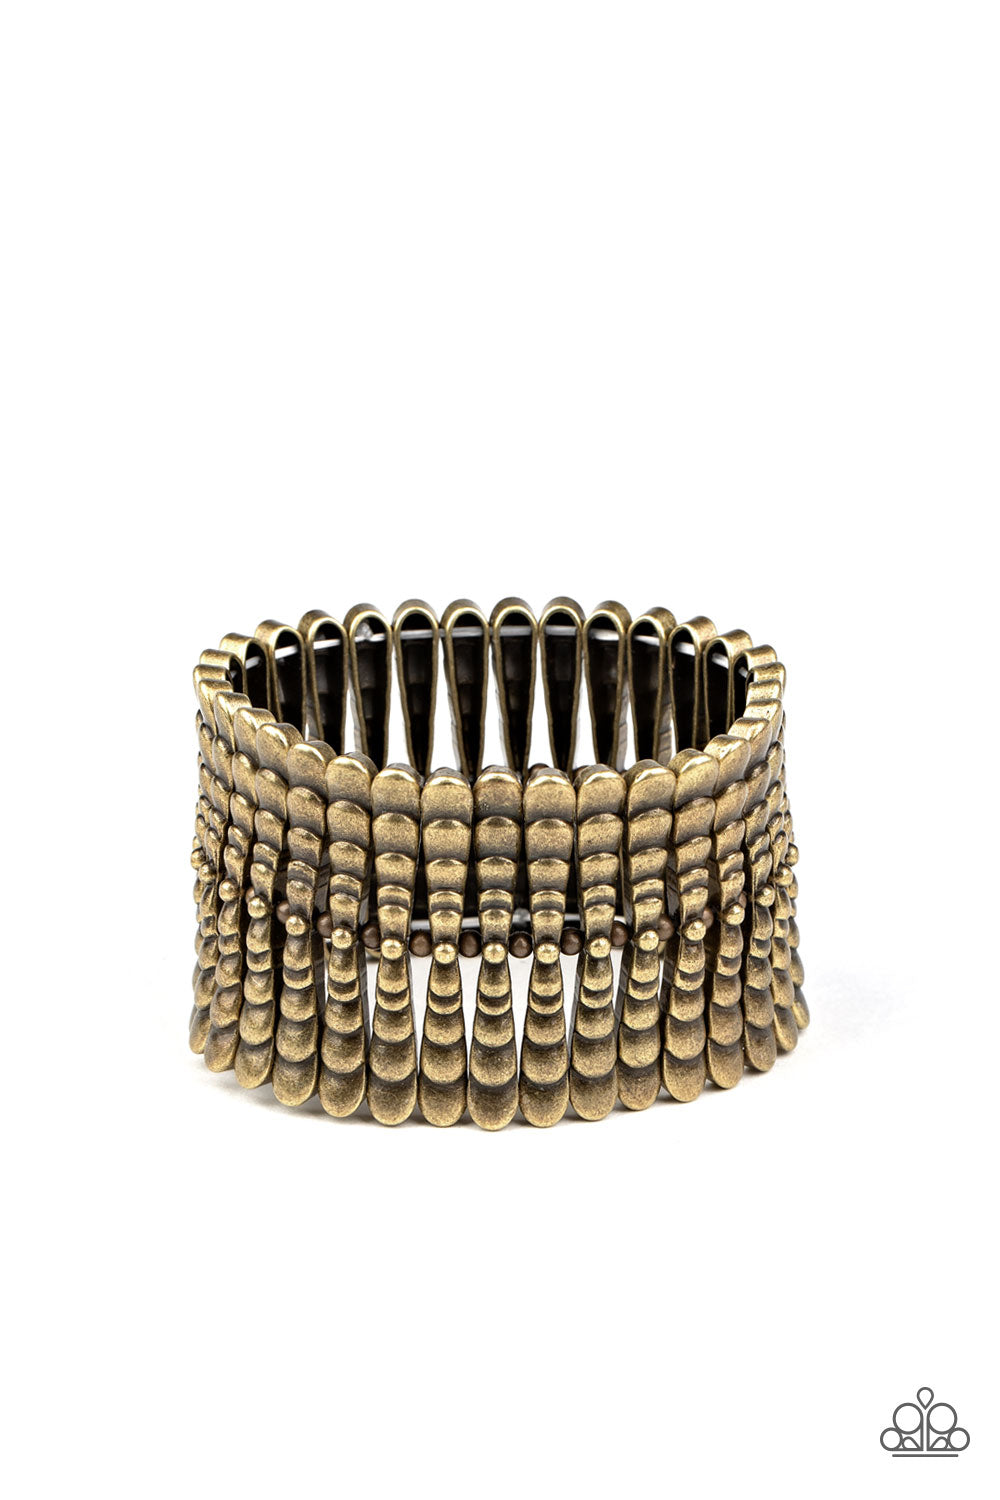 &lt;P&gt;Infused with dainty brass beads, rippling brass bars are threaded along stretchy bands around the wrist, creating a rustic centerpiece.
&lt;/P&gt;  

&lt;P&gt; &lt;I&gt;Sold as one individual bracelet.&lt;/I&gt;  &lt;/P&gt;


&lt;img src=\&quot;https://d9b54x484lq62.cloudfront.net/paparazzi/shopping/images/517_tag150x115_1.png\&quot; alt=\&quot;New Kit\&quot; align=\&quot;middle\&quot; height=\&quot;50\&quot; width=\&quot;50\&quot;/&gt;